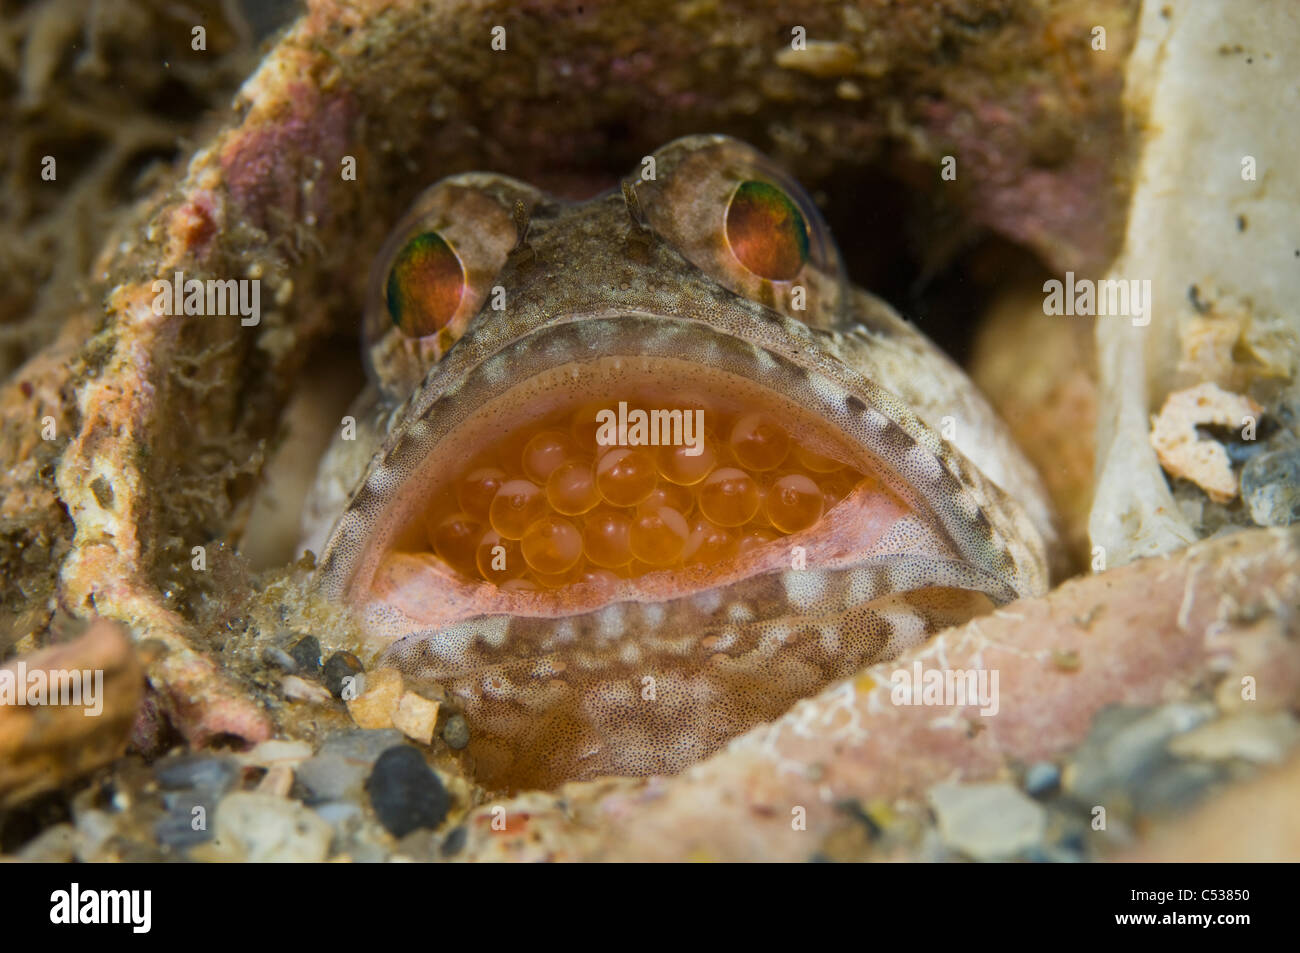 Male Jawfish (Opistognathus sp) incubating eggs in his mouth. This species is known as a paternal mouthbrooder. Stock Photo